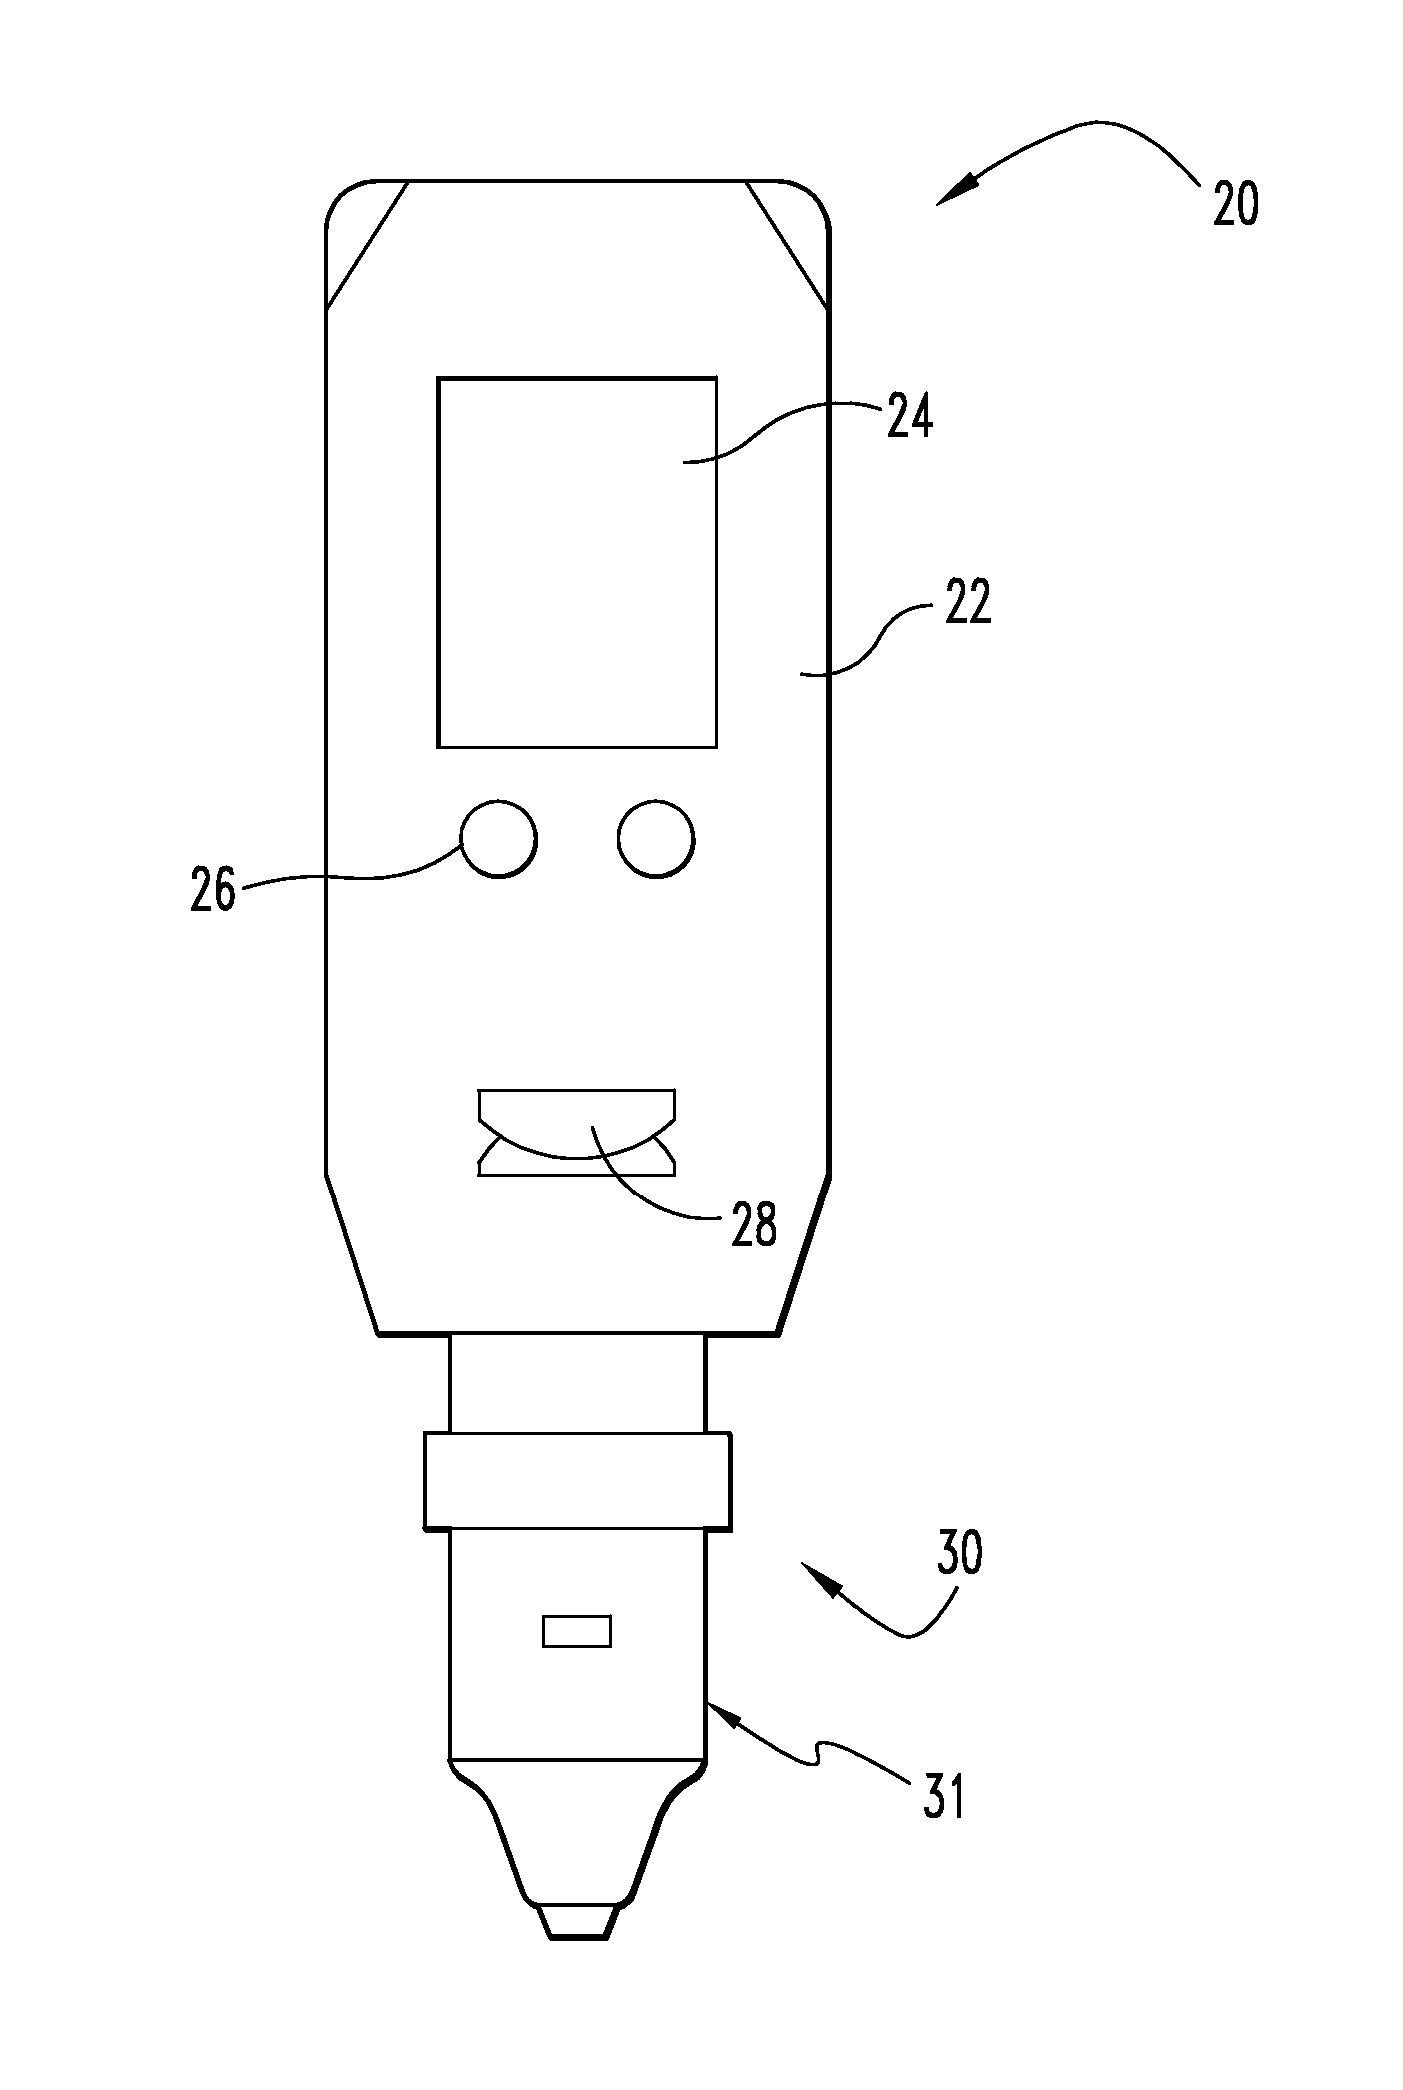 Control solution packets and methods for calibrating bodily fluid sampling devices